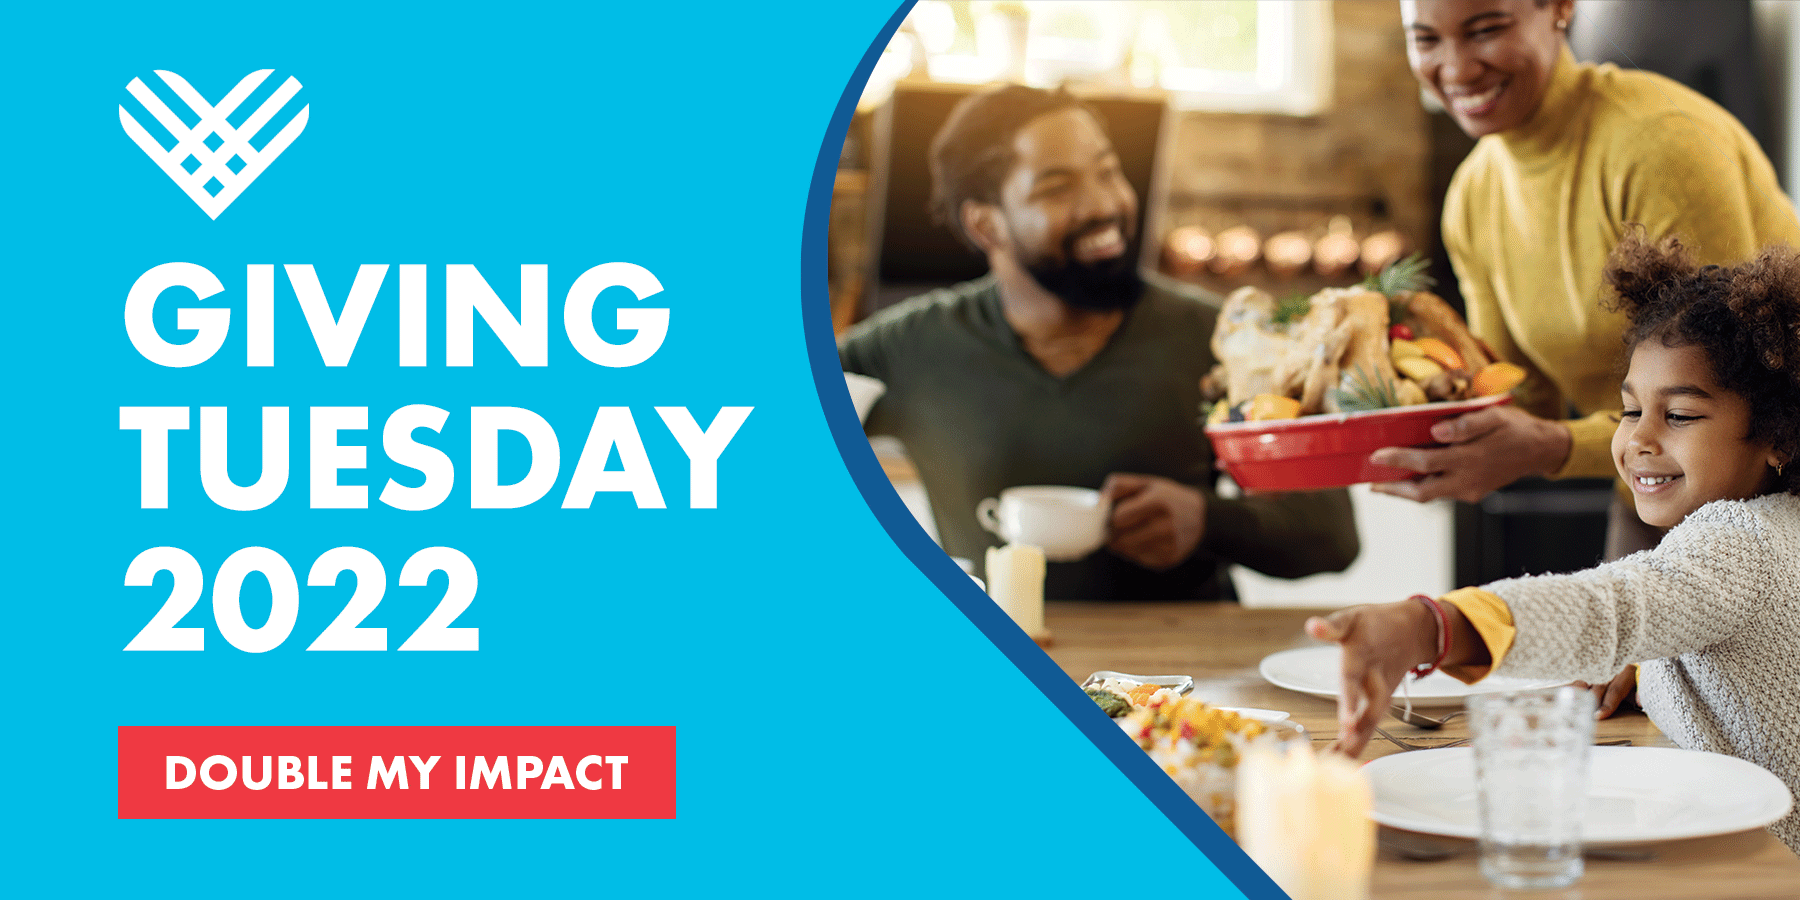 Giving Tuesday 2022 - DOUBLE MY IMPACT